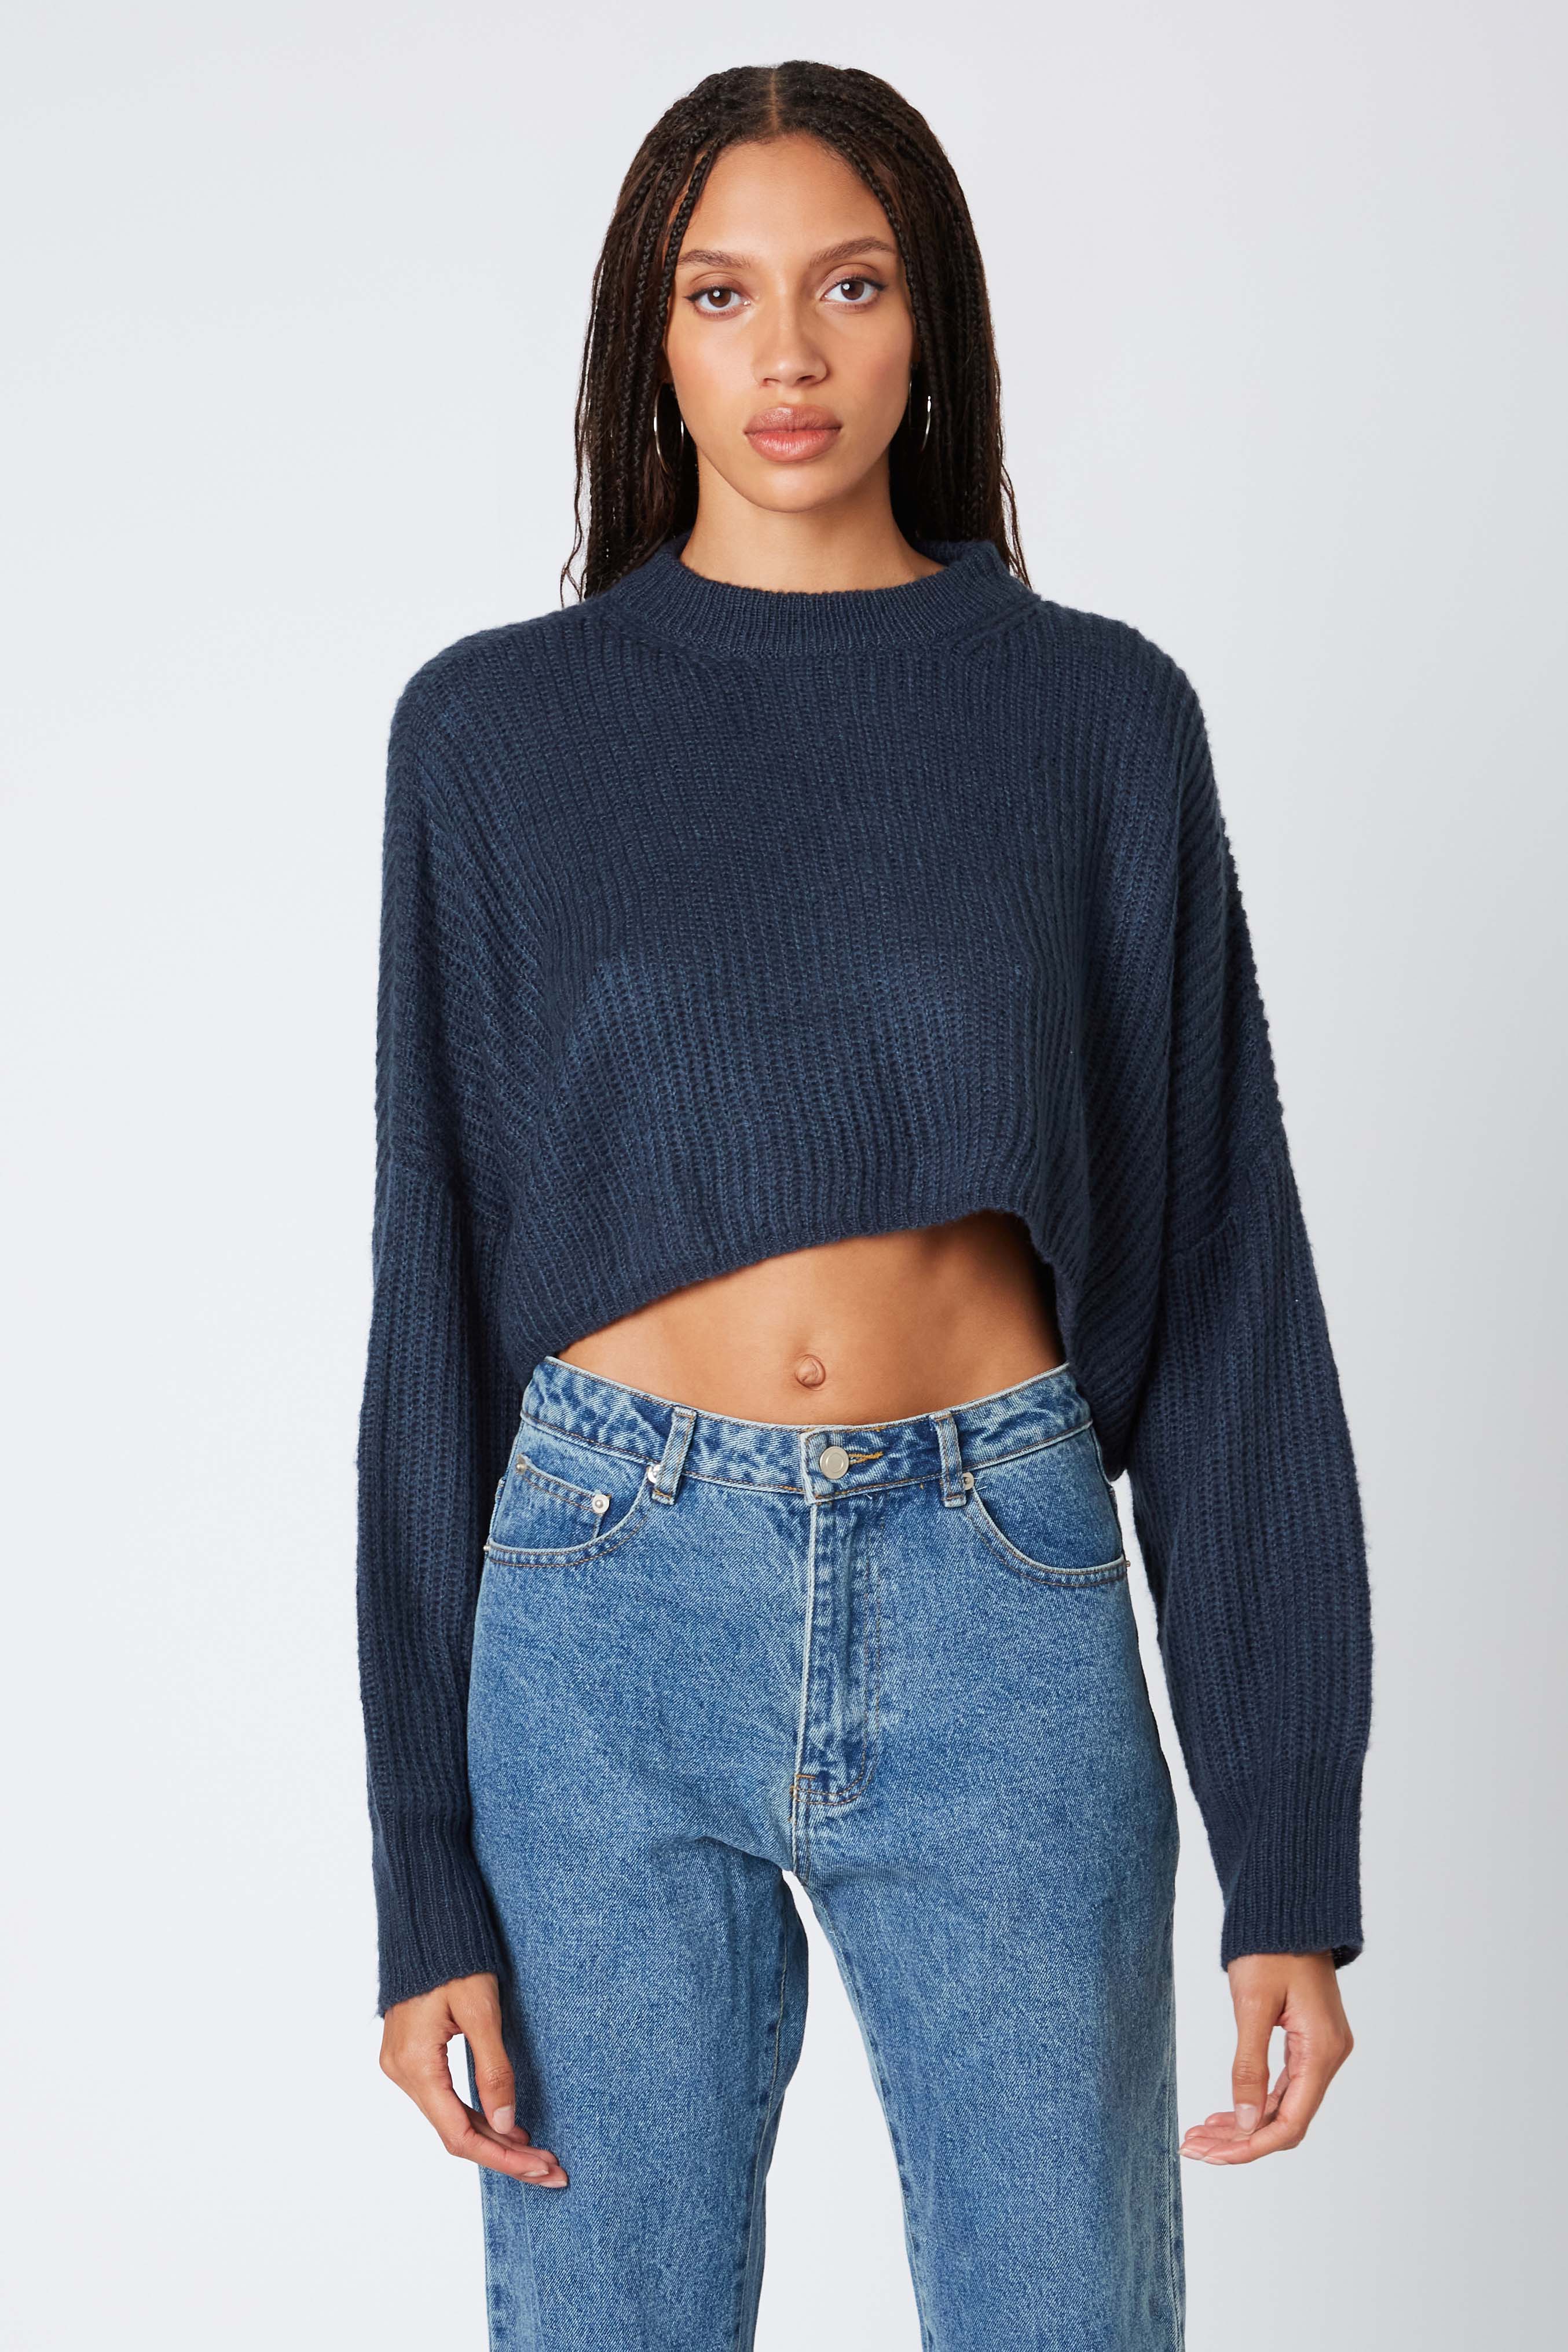 Cropped Mockneck Sweater in Dusk Front View